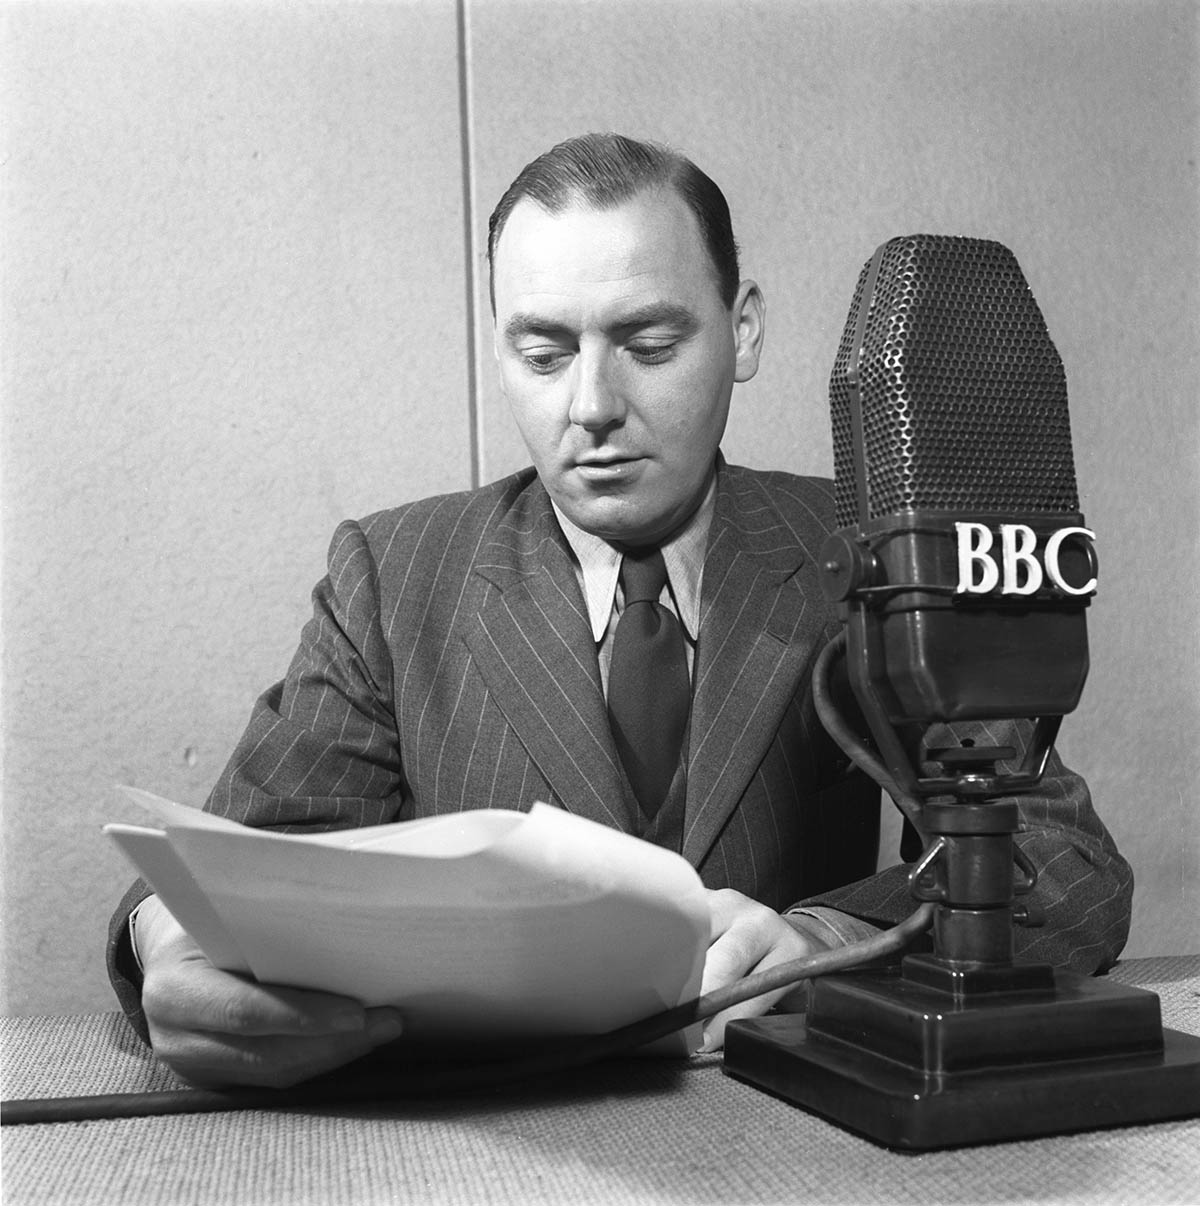 Frank Gillard, BBC war correspondent is seated in front of a large BBC microphone, holding some papers.